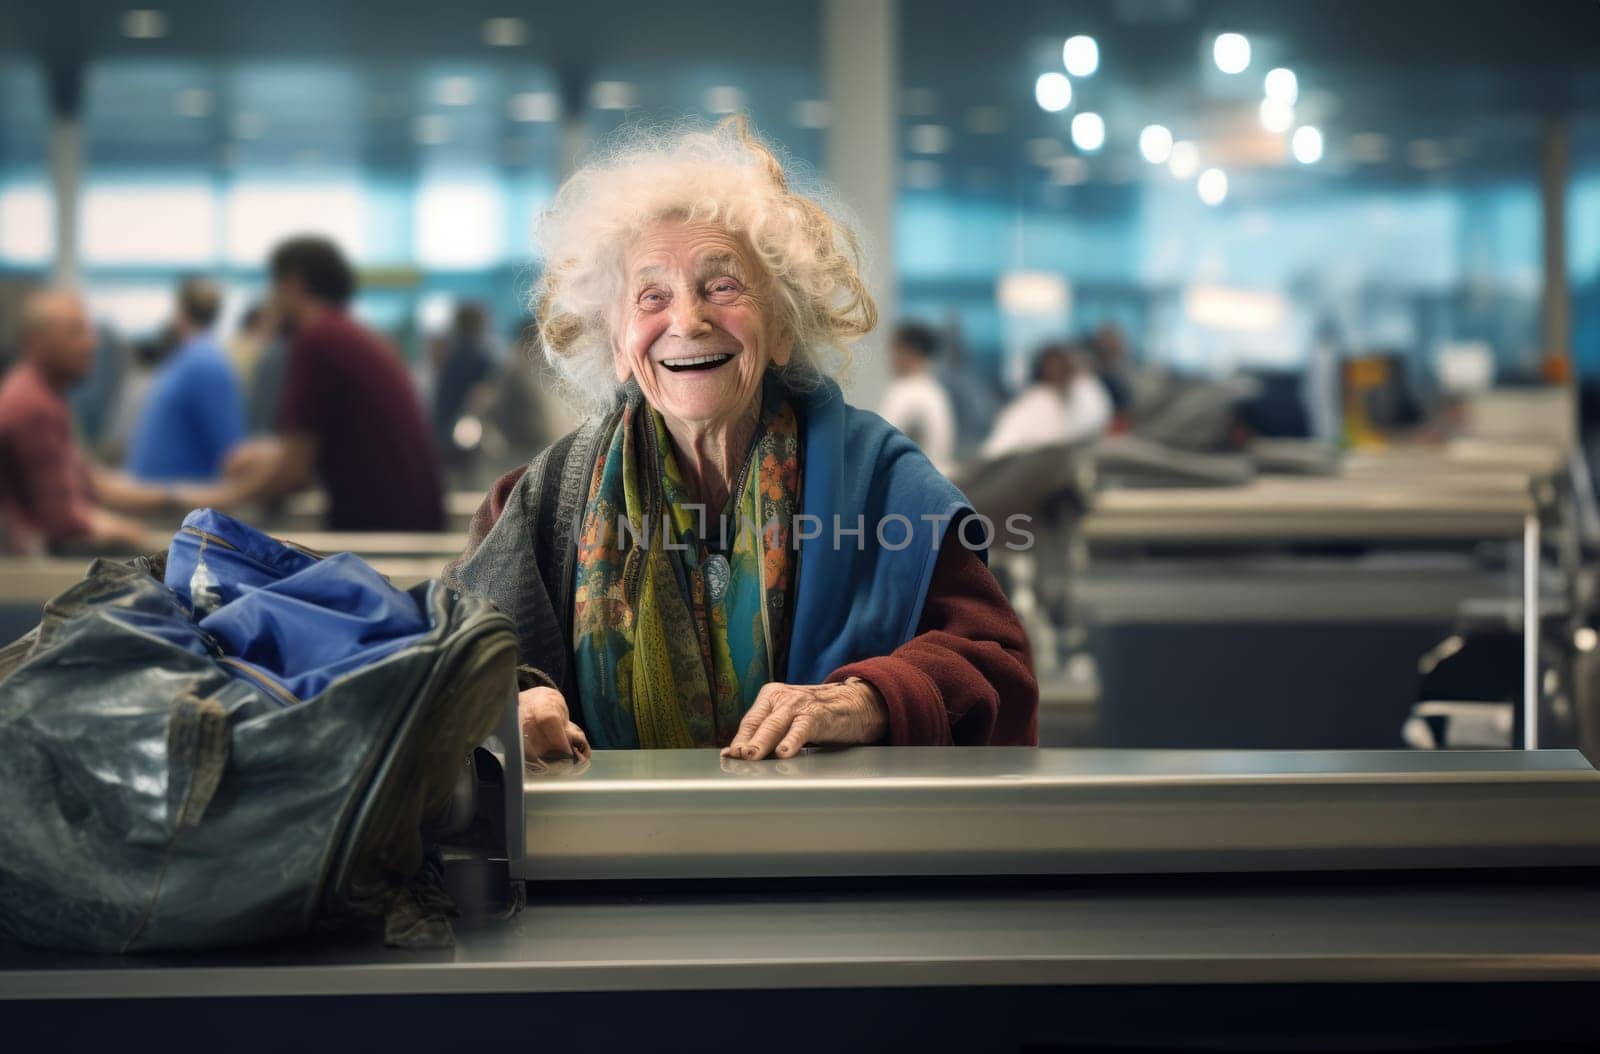 A heartwarming moment of joyful anticipation, a happy elderly woman sits at the airport, eagerly awaiting an adventurous journey ahead, brimming with excitement and anticipation